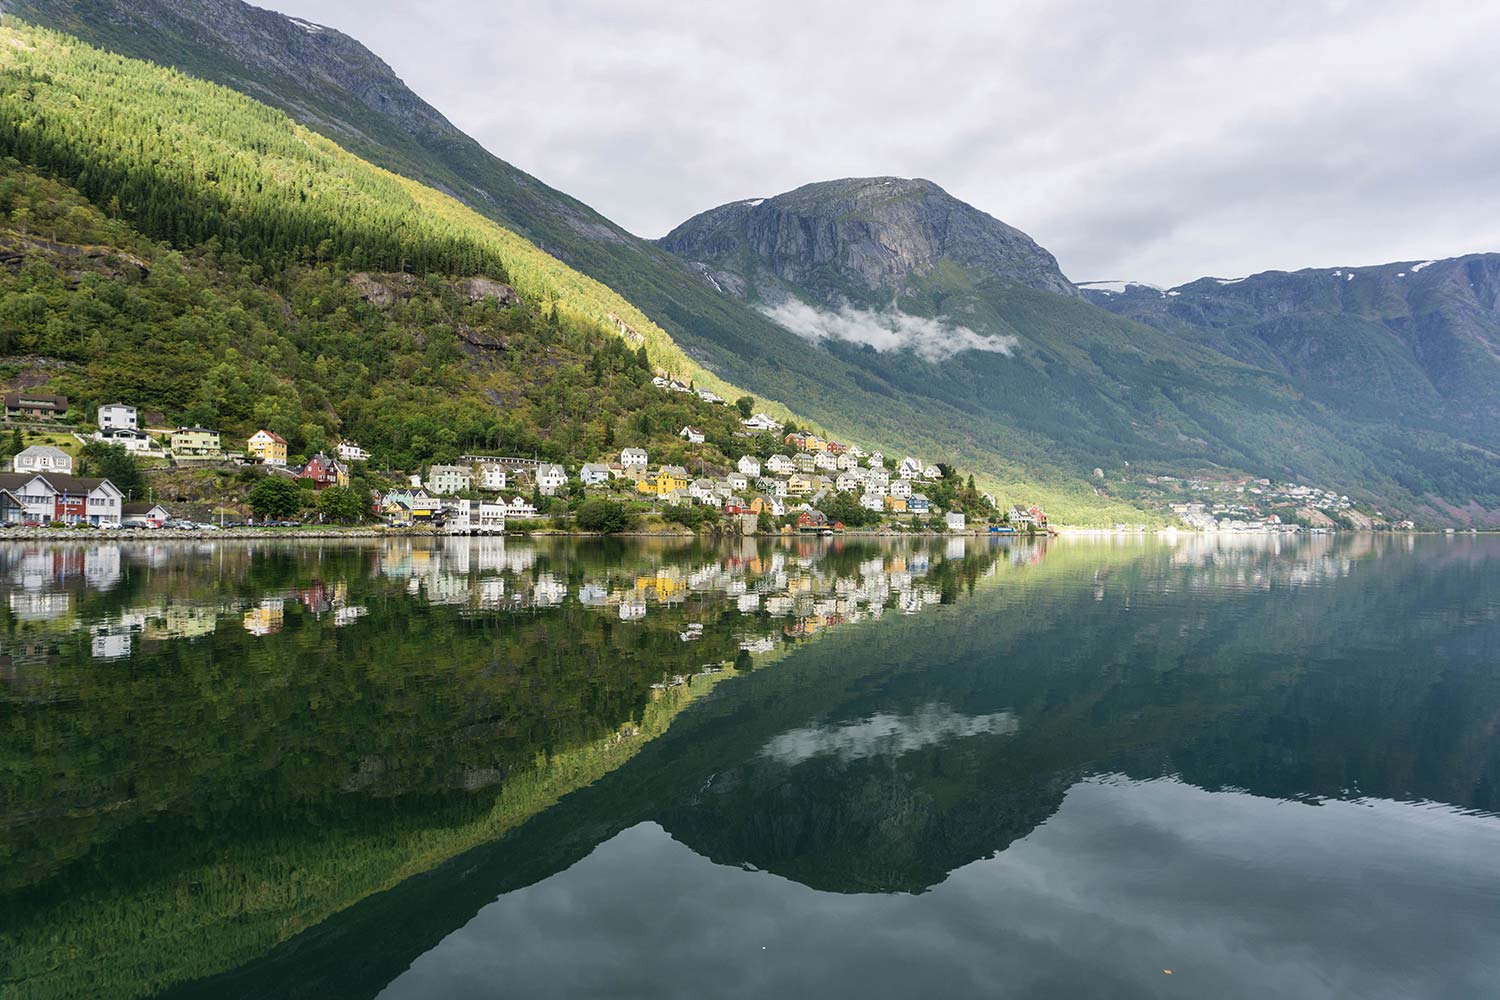 A picture of the town of Odda, Norway and its reflection with mountains and clouds in the background.